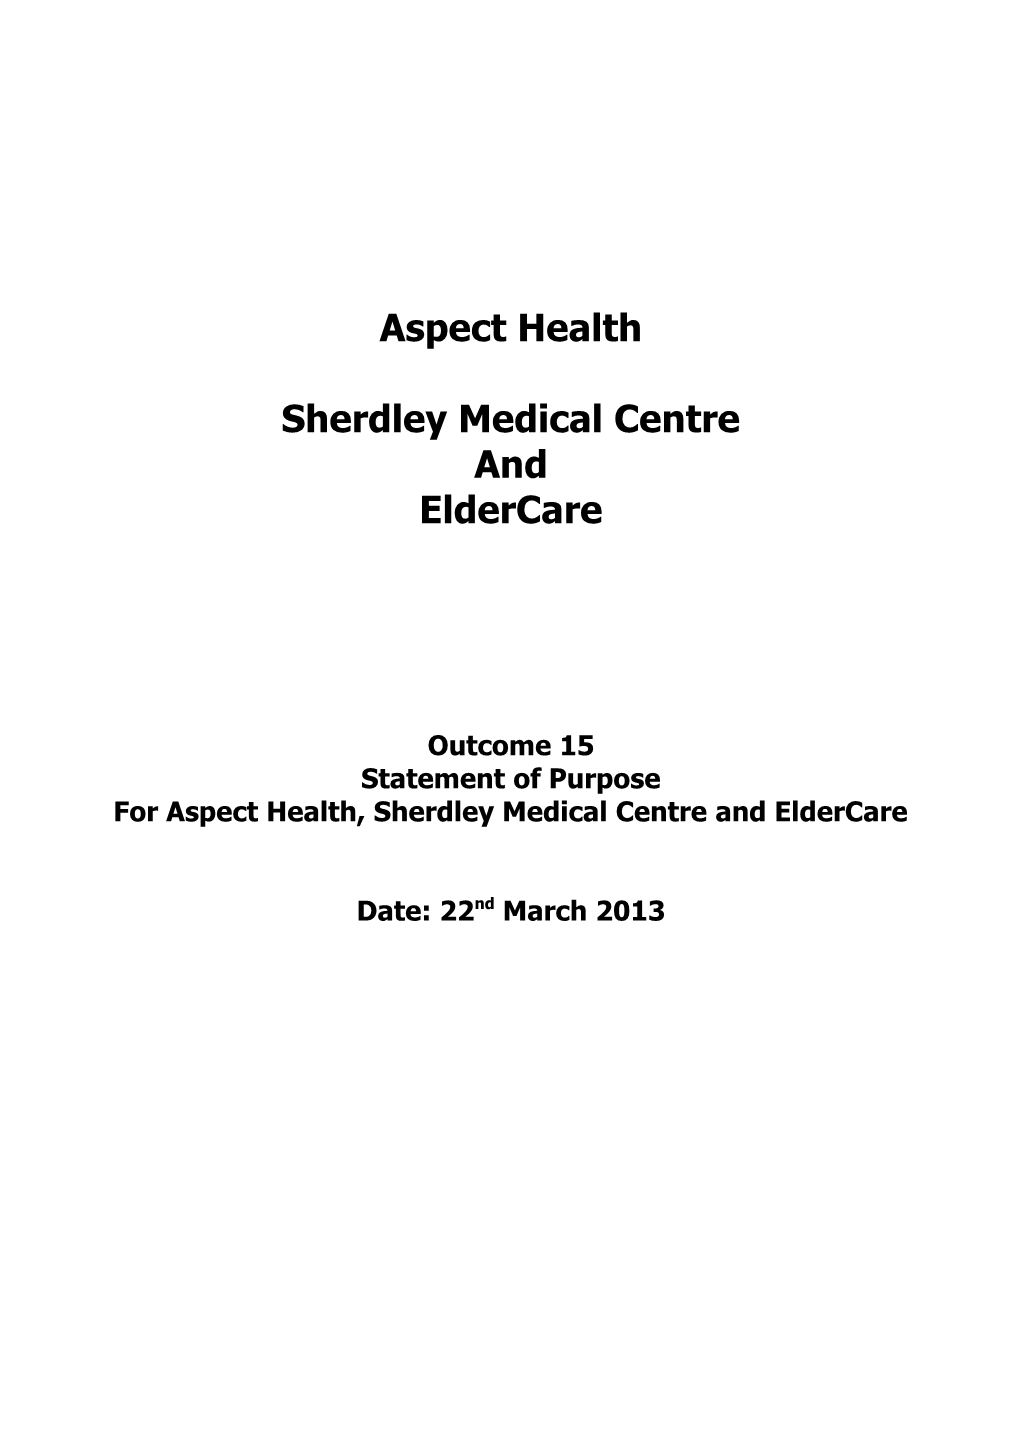 For Aspect Health, Sherdley Medical Centre and Eldercare